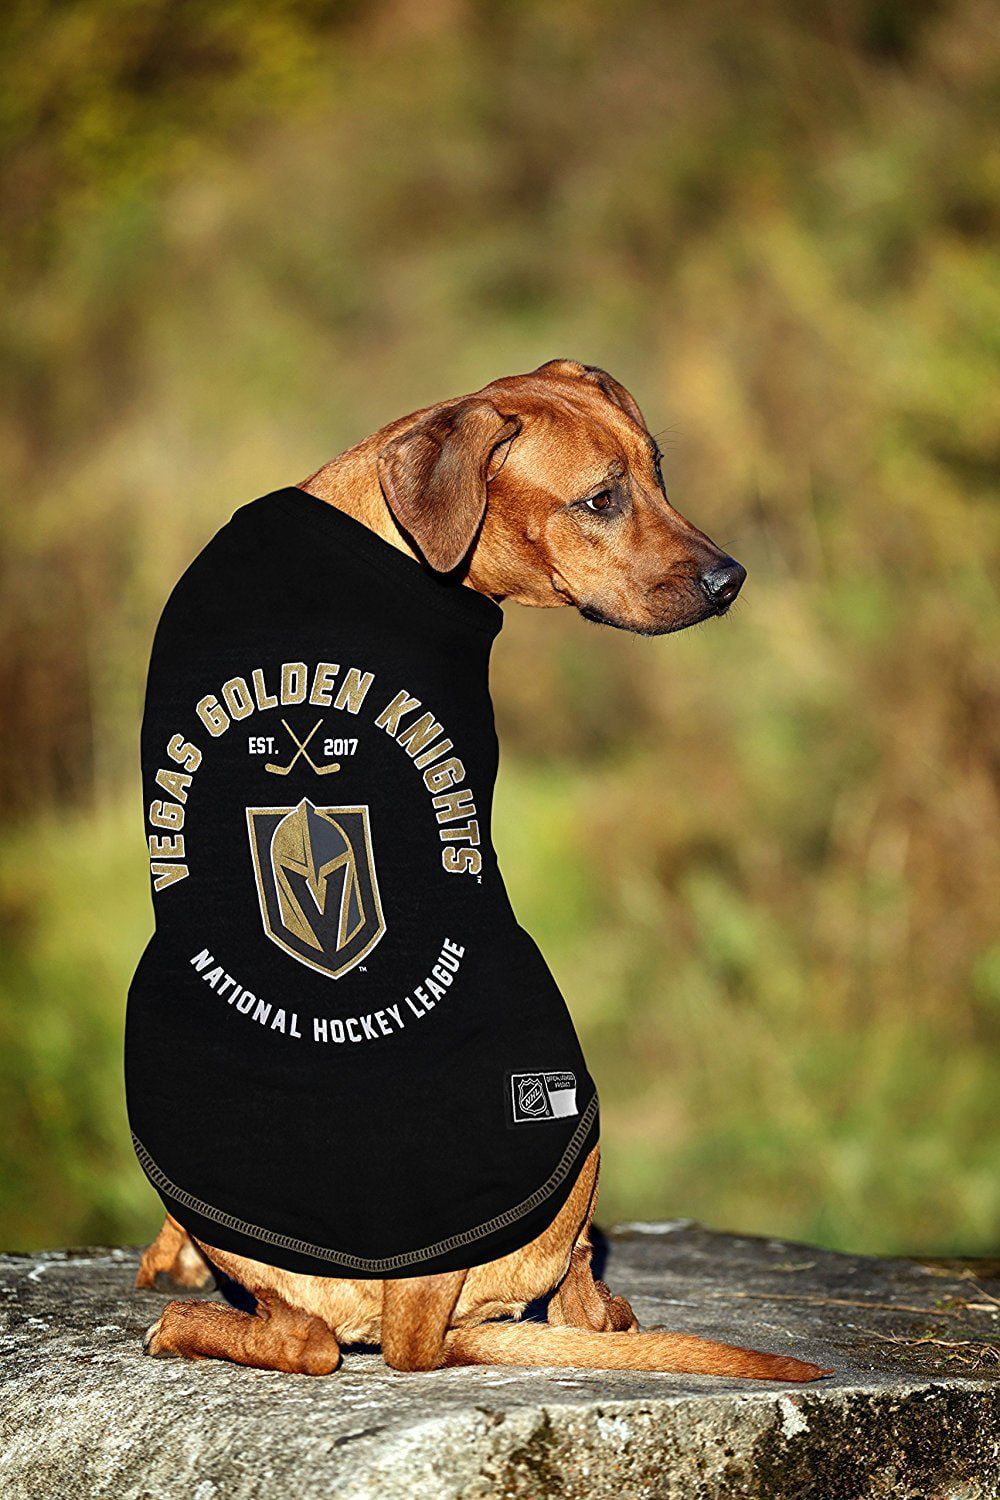 Pet Supplies : Pets First NHL LAS Vegas Golden Knights Stick Toy for Dogs &  Cats. Play Hockey with Your Pet with This Licensed Dog Tough Toy Reward! ,  16 inches long 